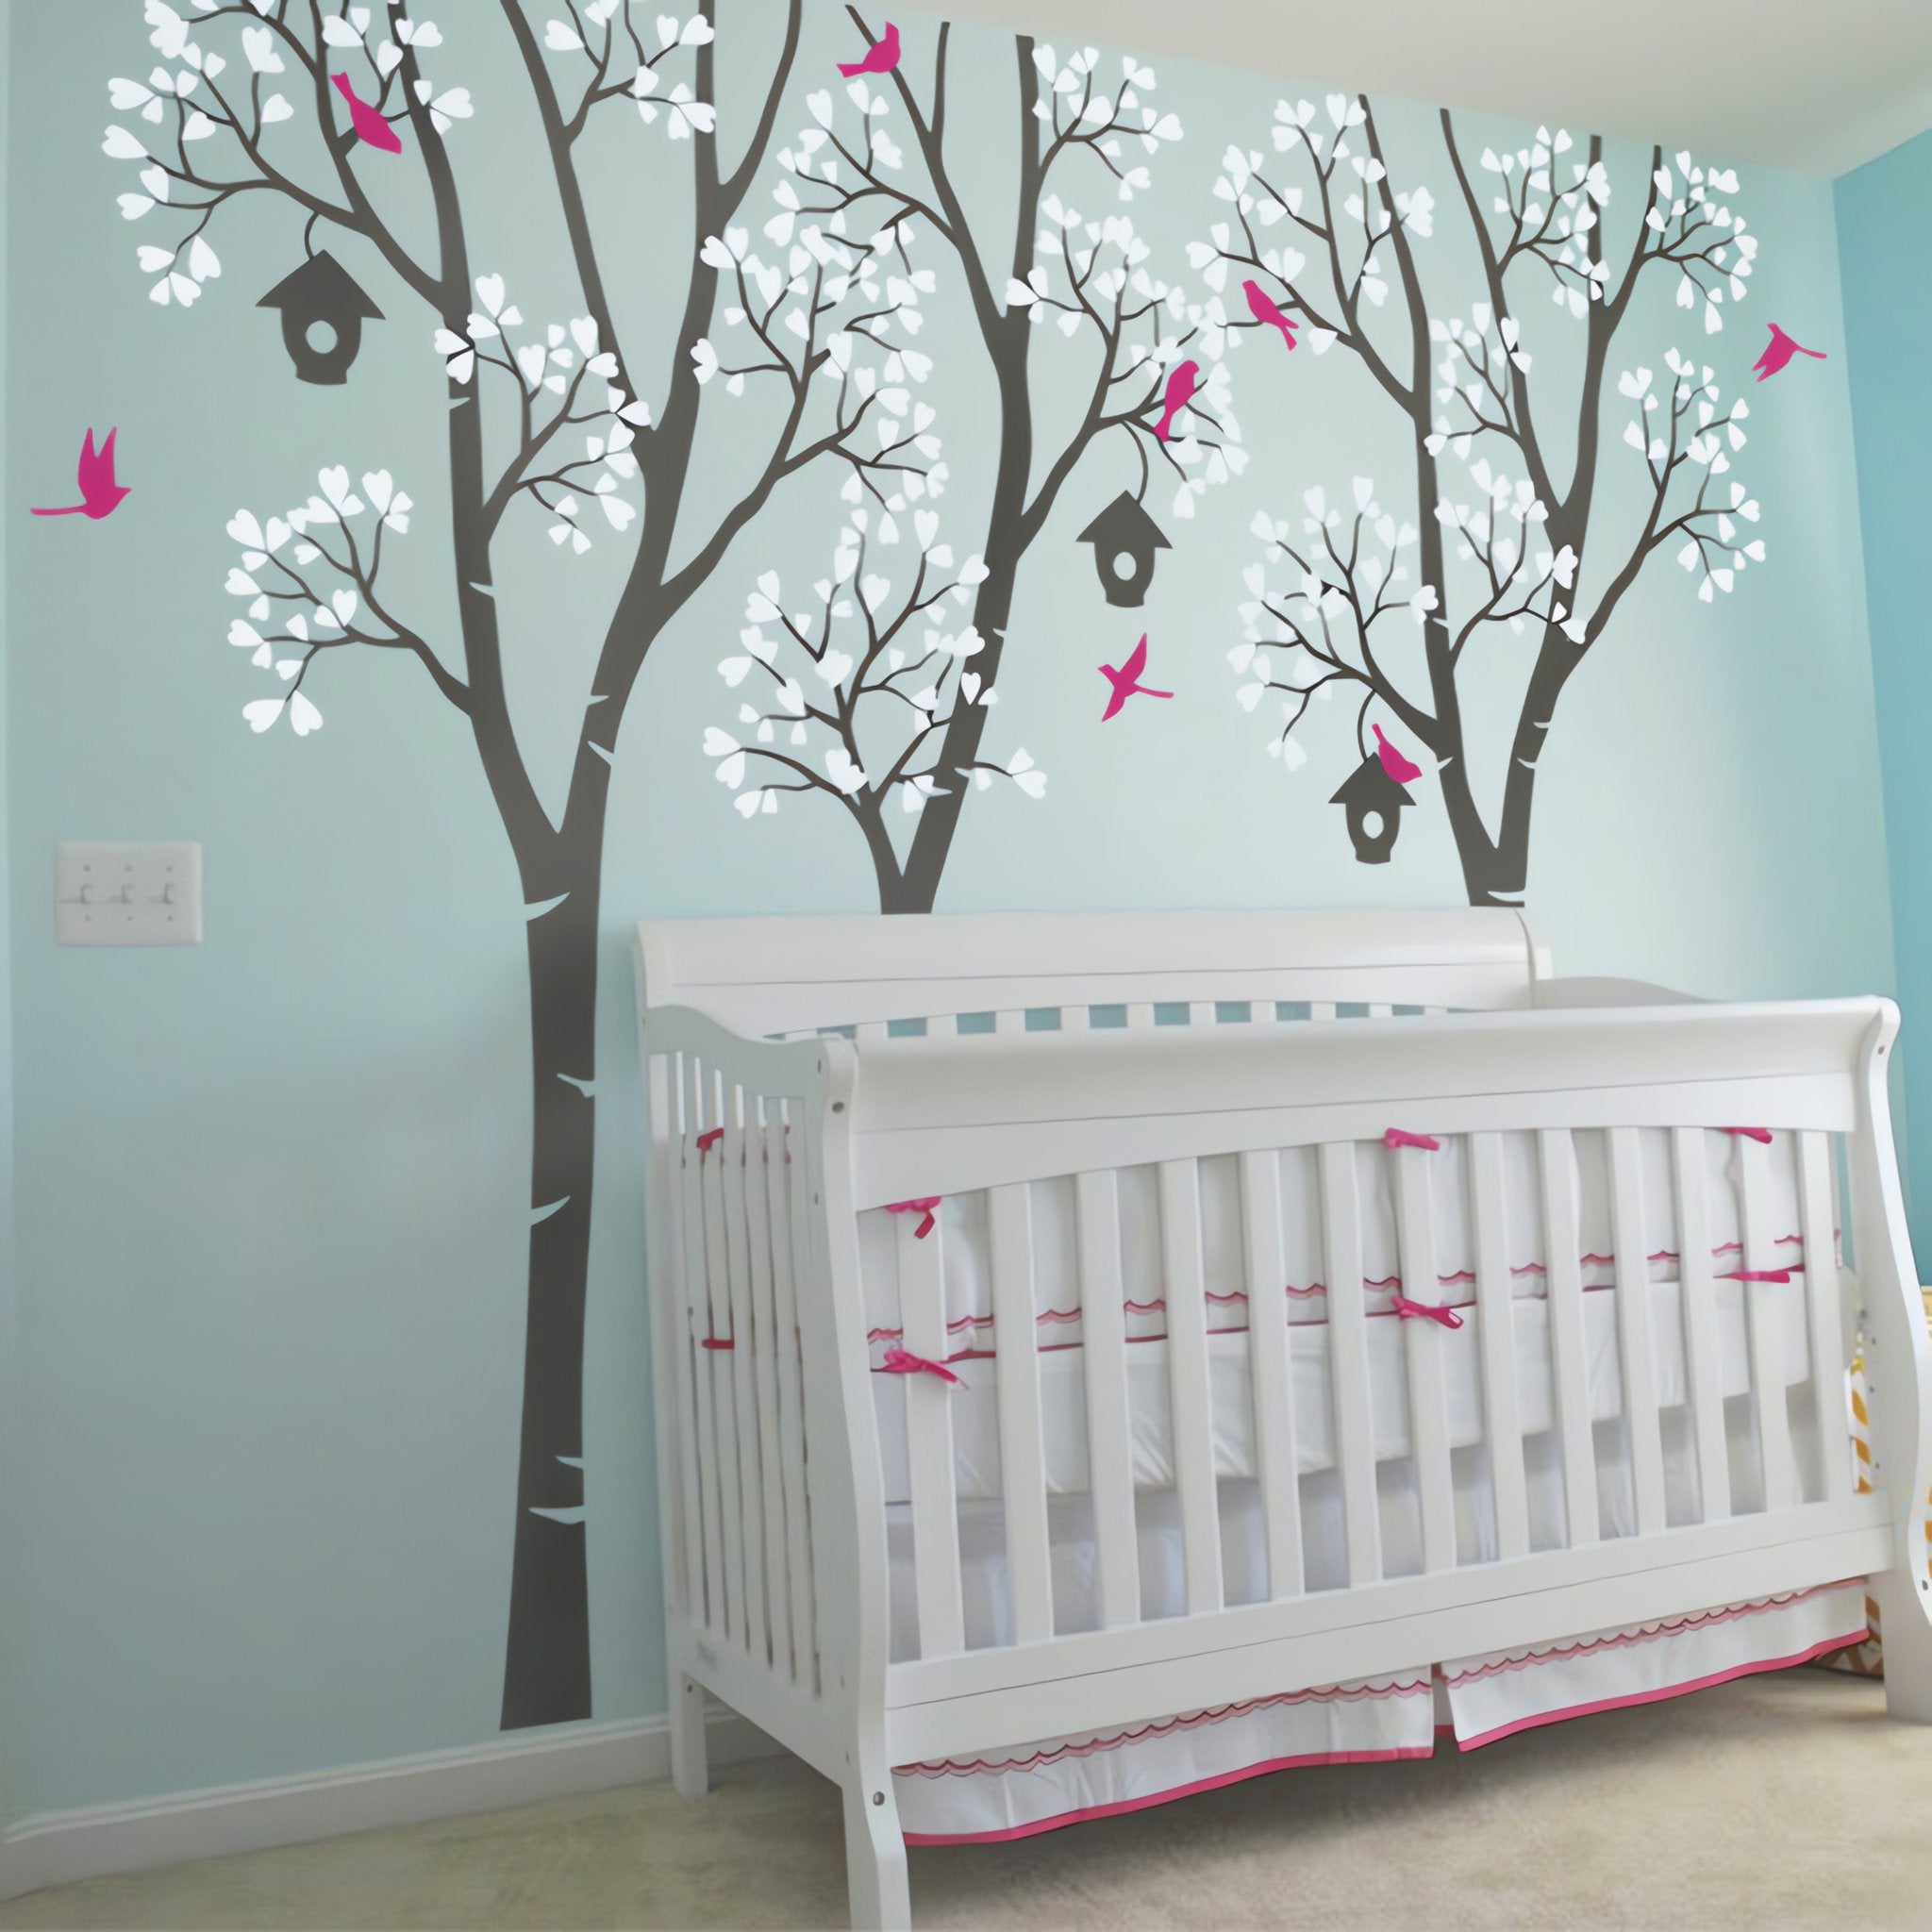 Tree wall sticker with birdhouses and birds in a nursery with a crib.